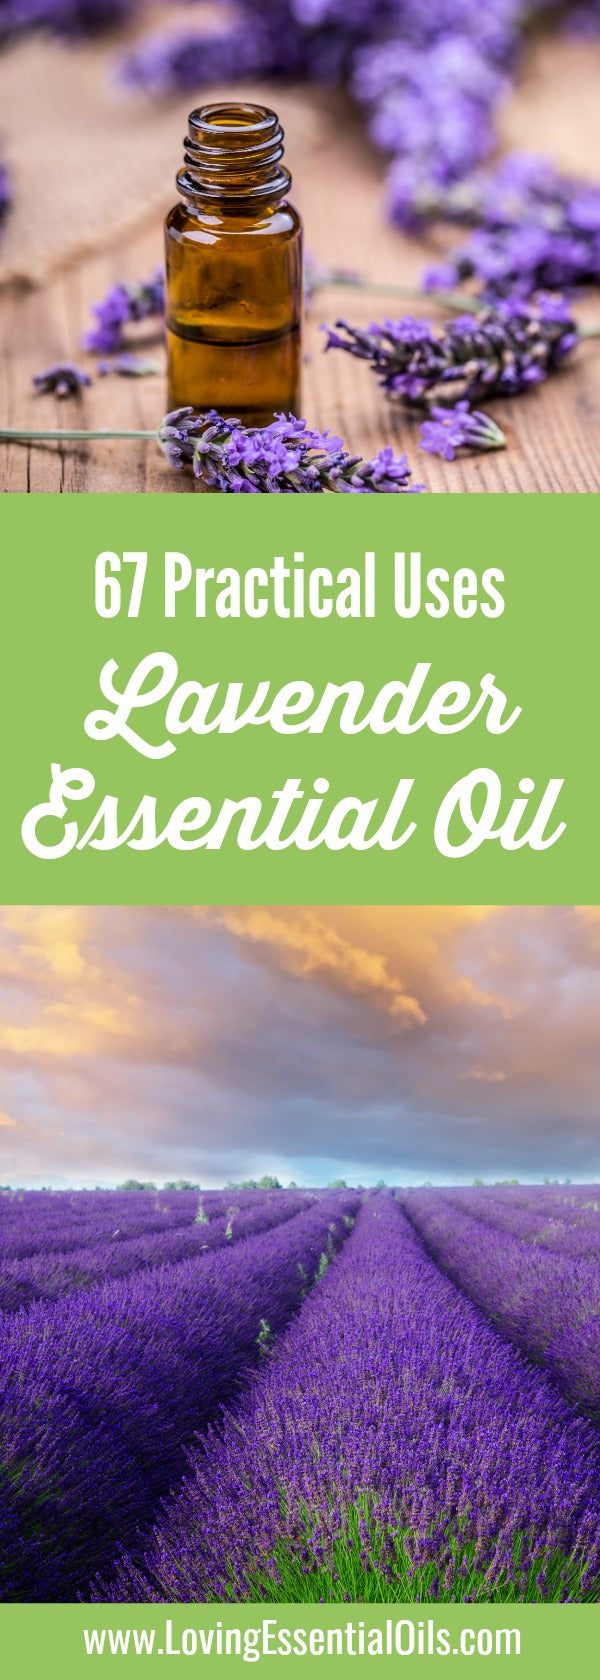 How to Use Lavender Essential Oil Pinterest by Loving Essential Oils